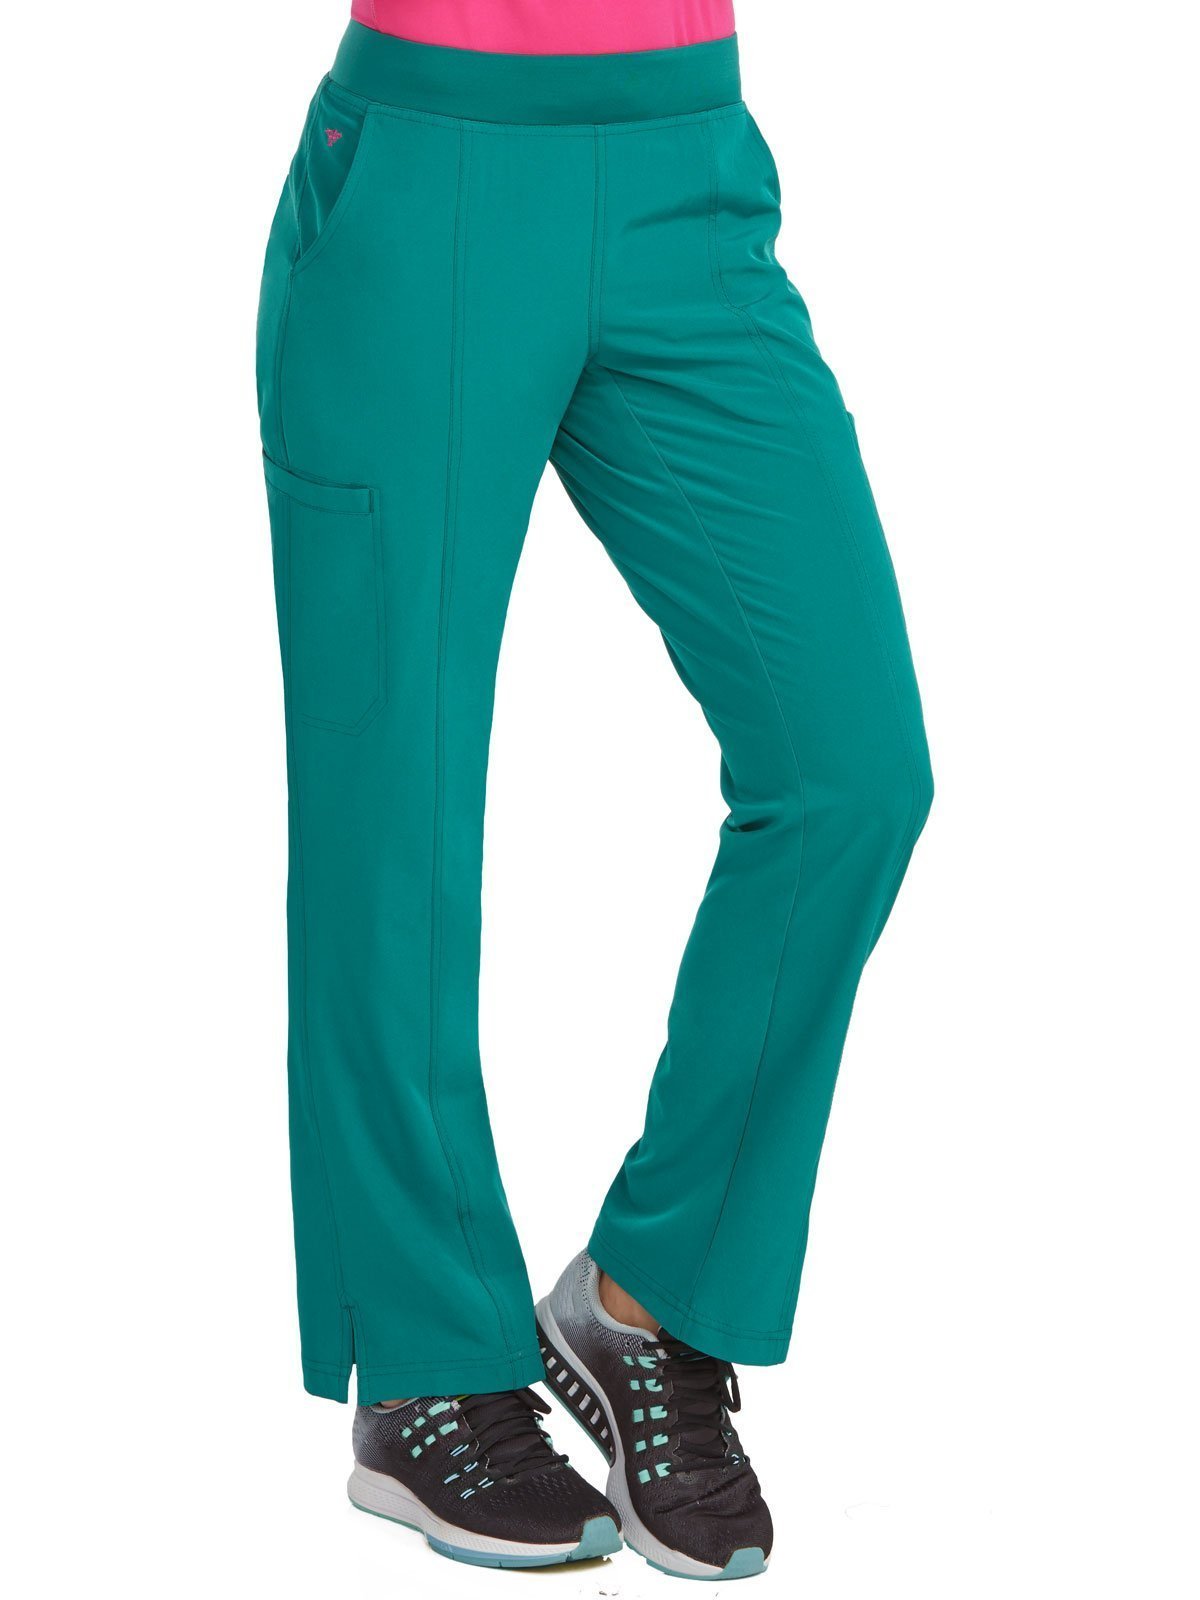 Med Couture Yoga 2 Cargo Pocket Pant For Women